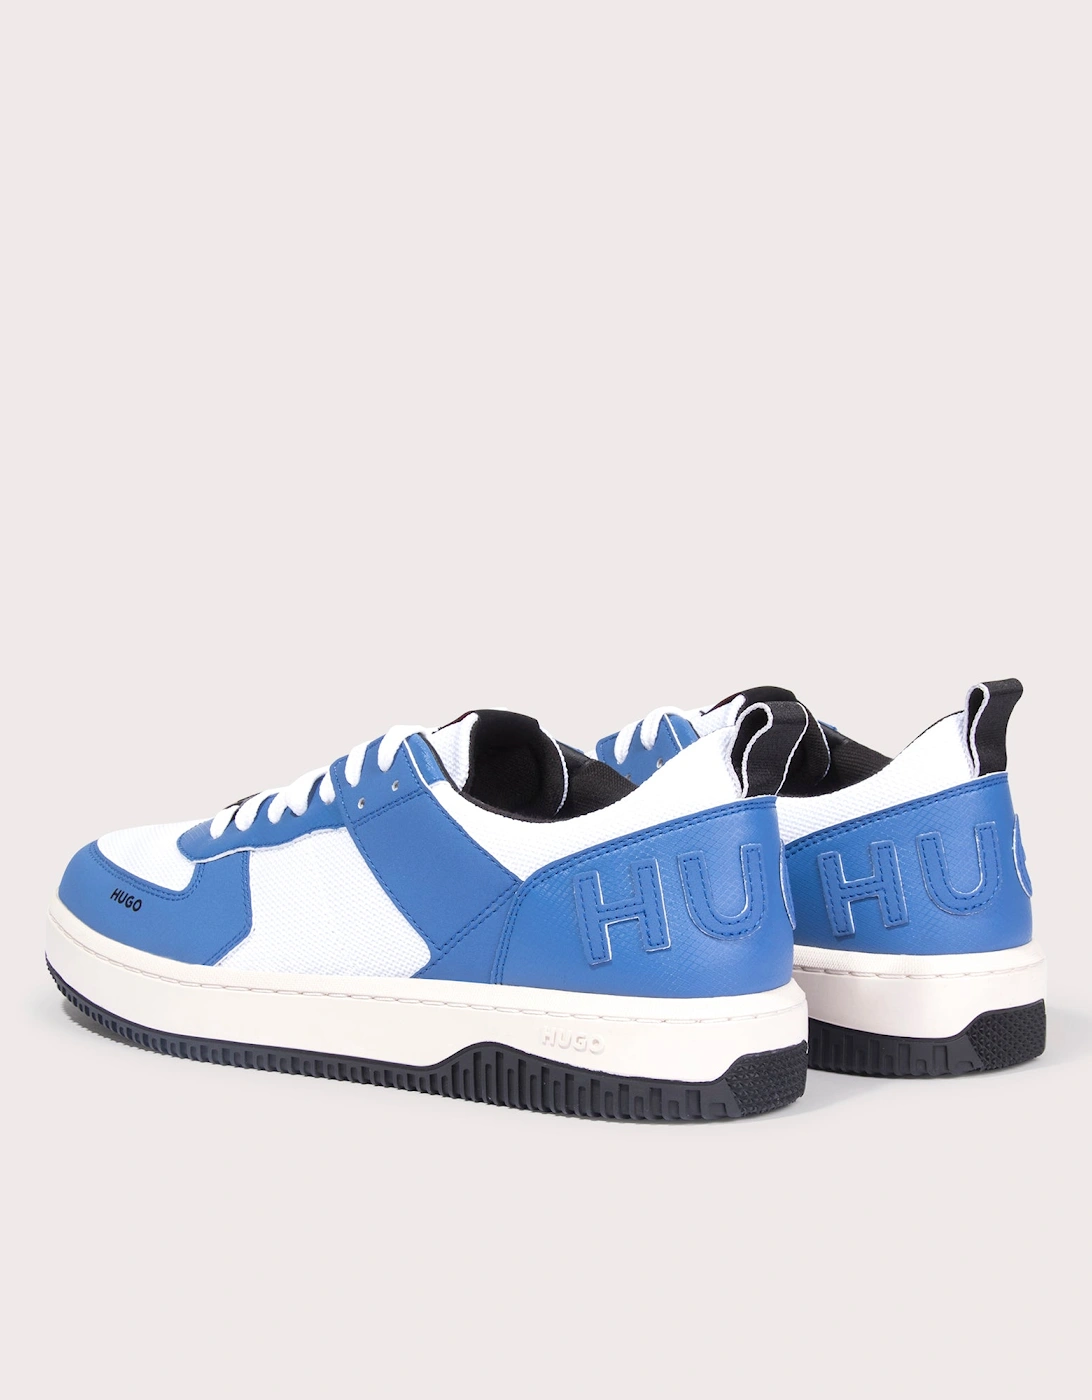 Mixed Material Kilian Tenn Pume Low Top Trainers